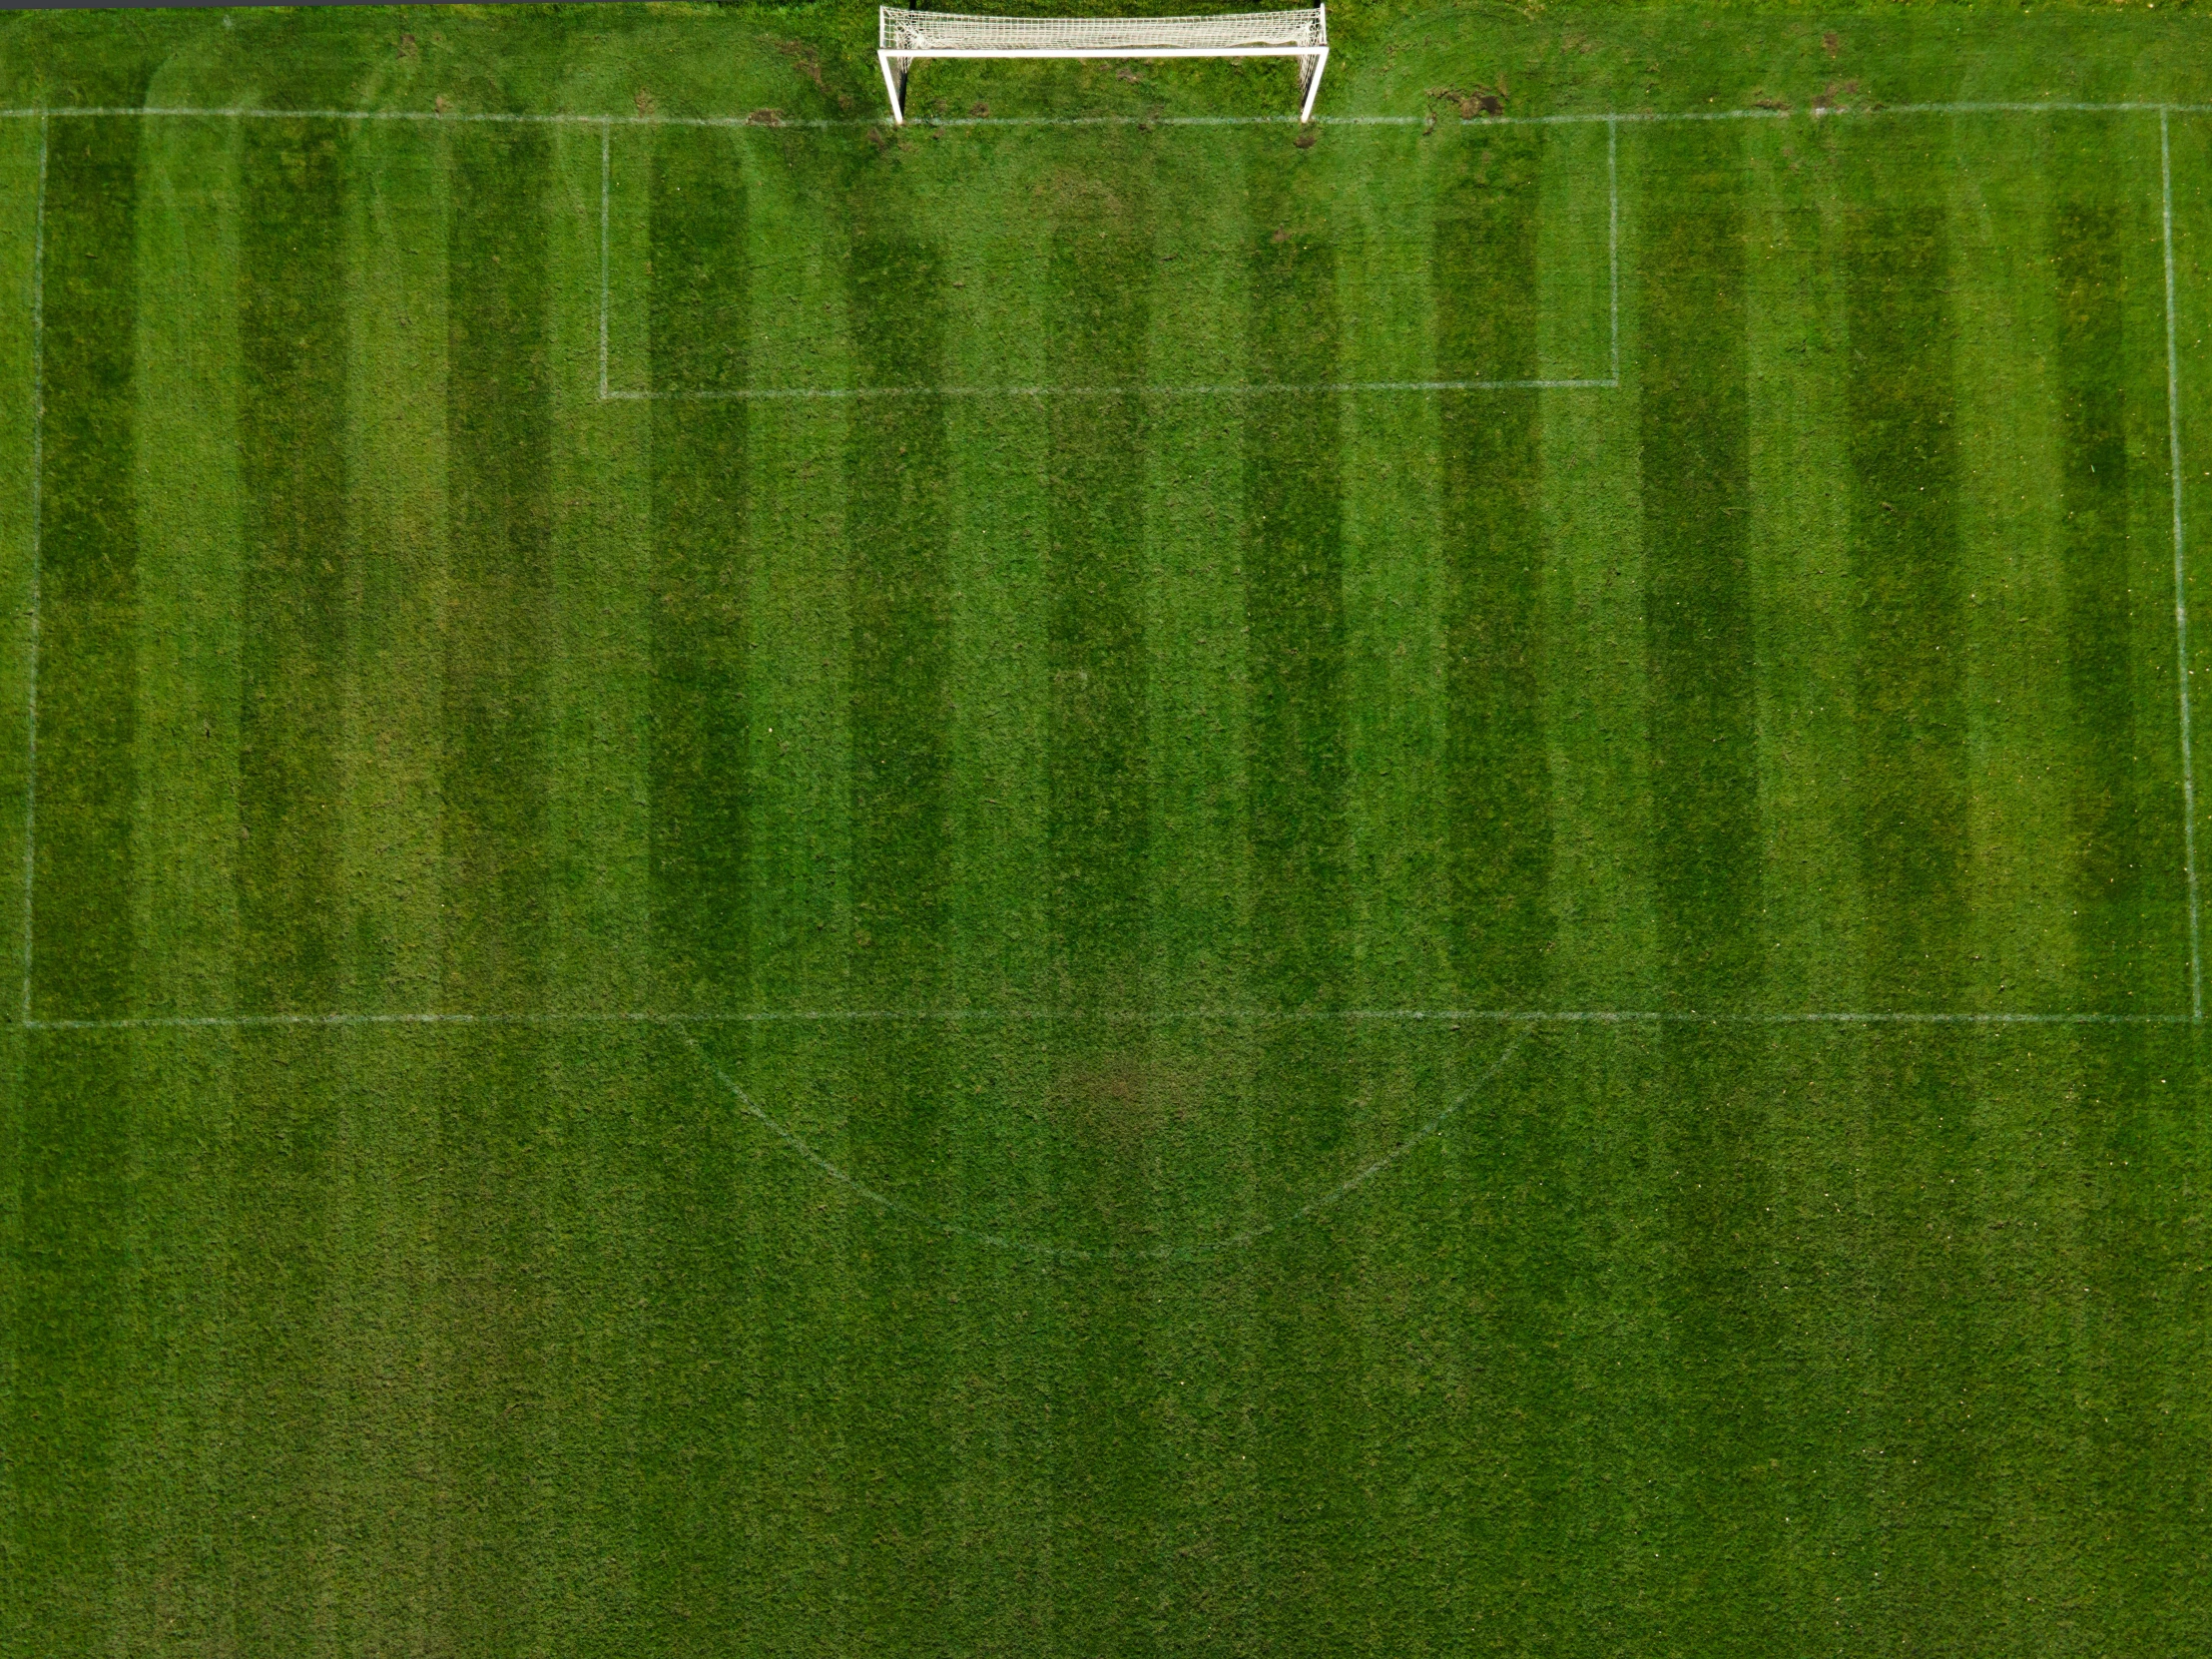 an overhead view of a soccer field with a white bench